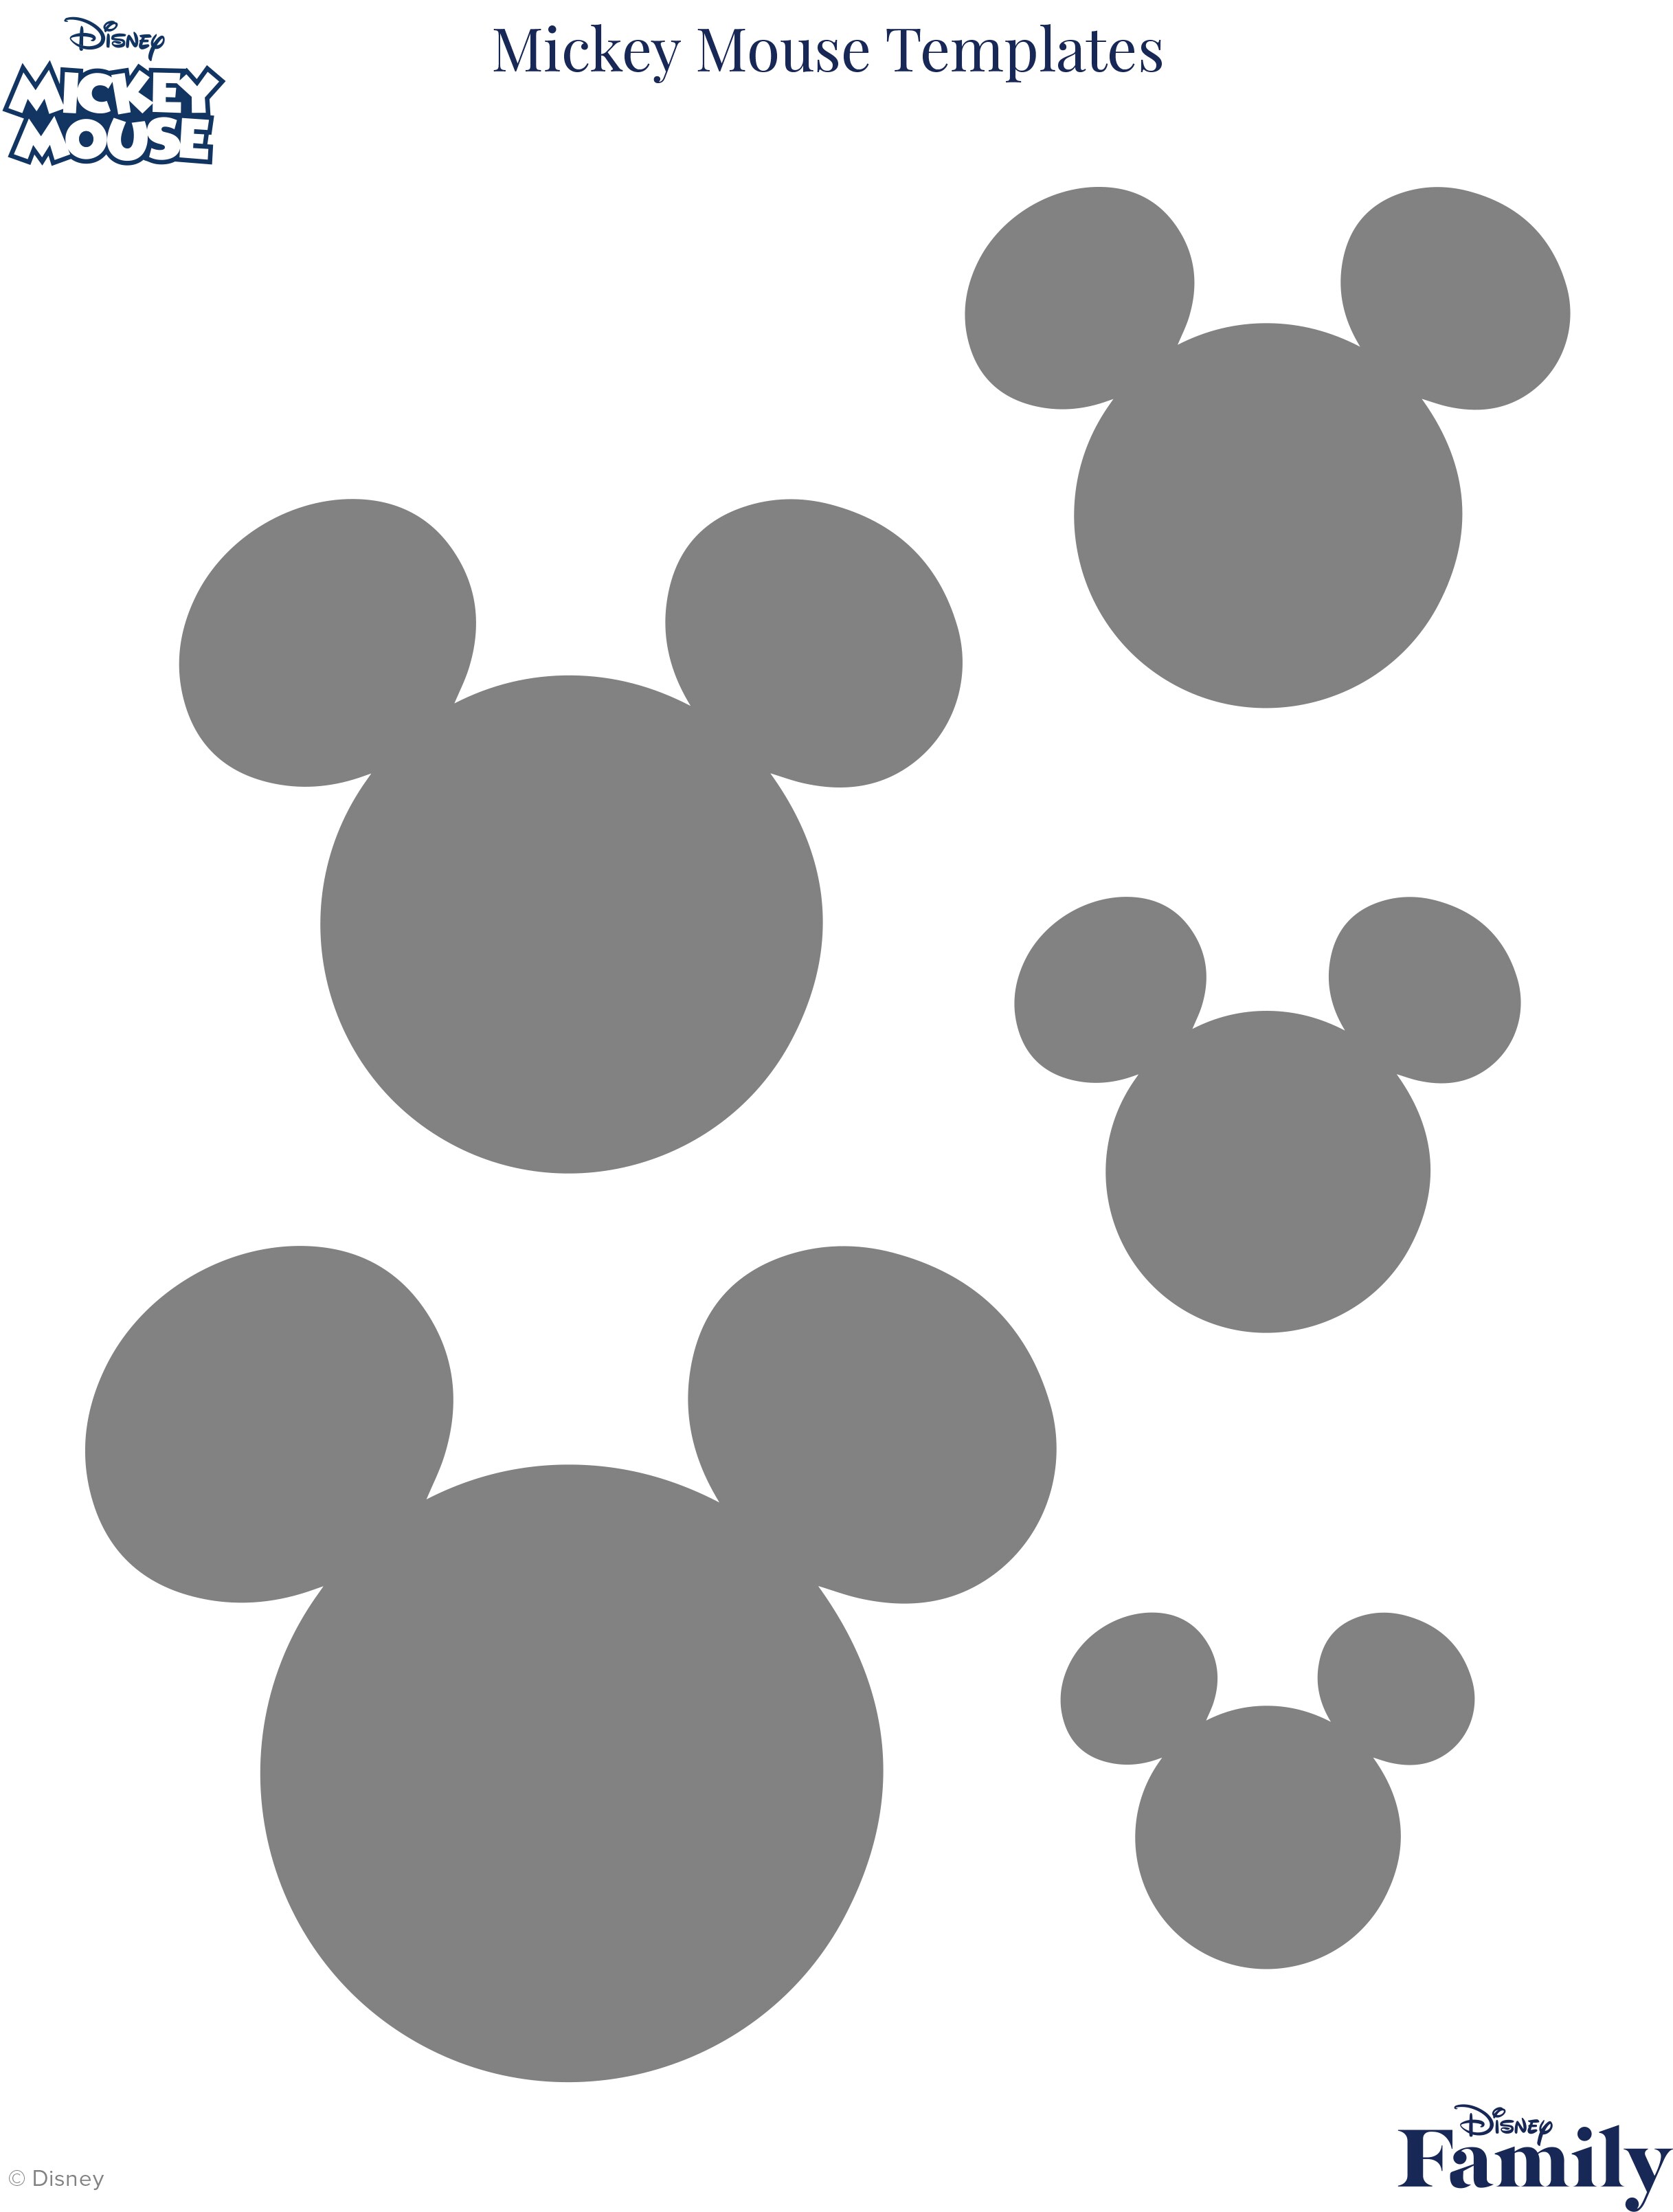 Different sized Mickey Mouse head shapes.